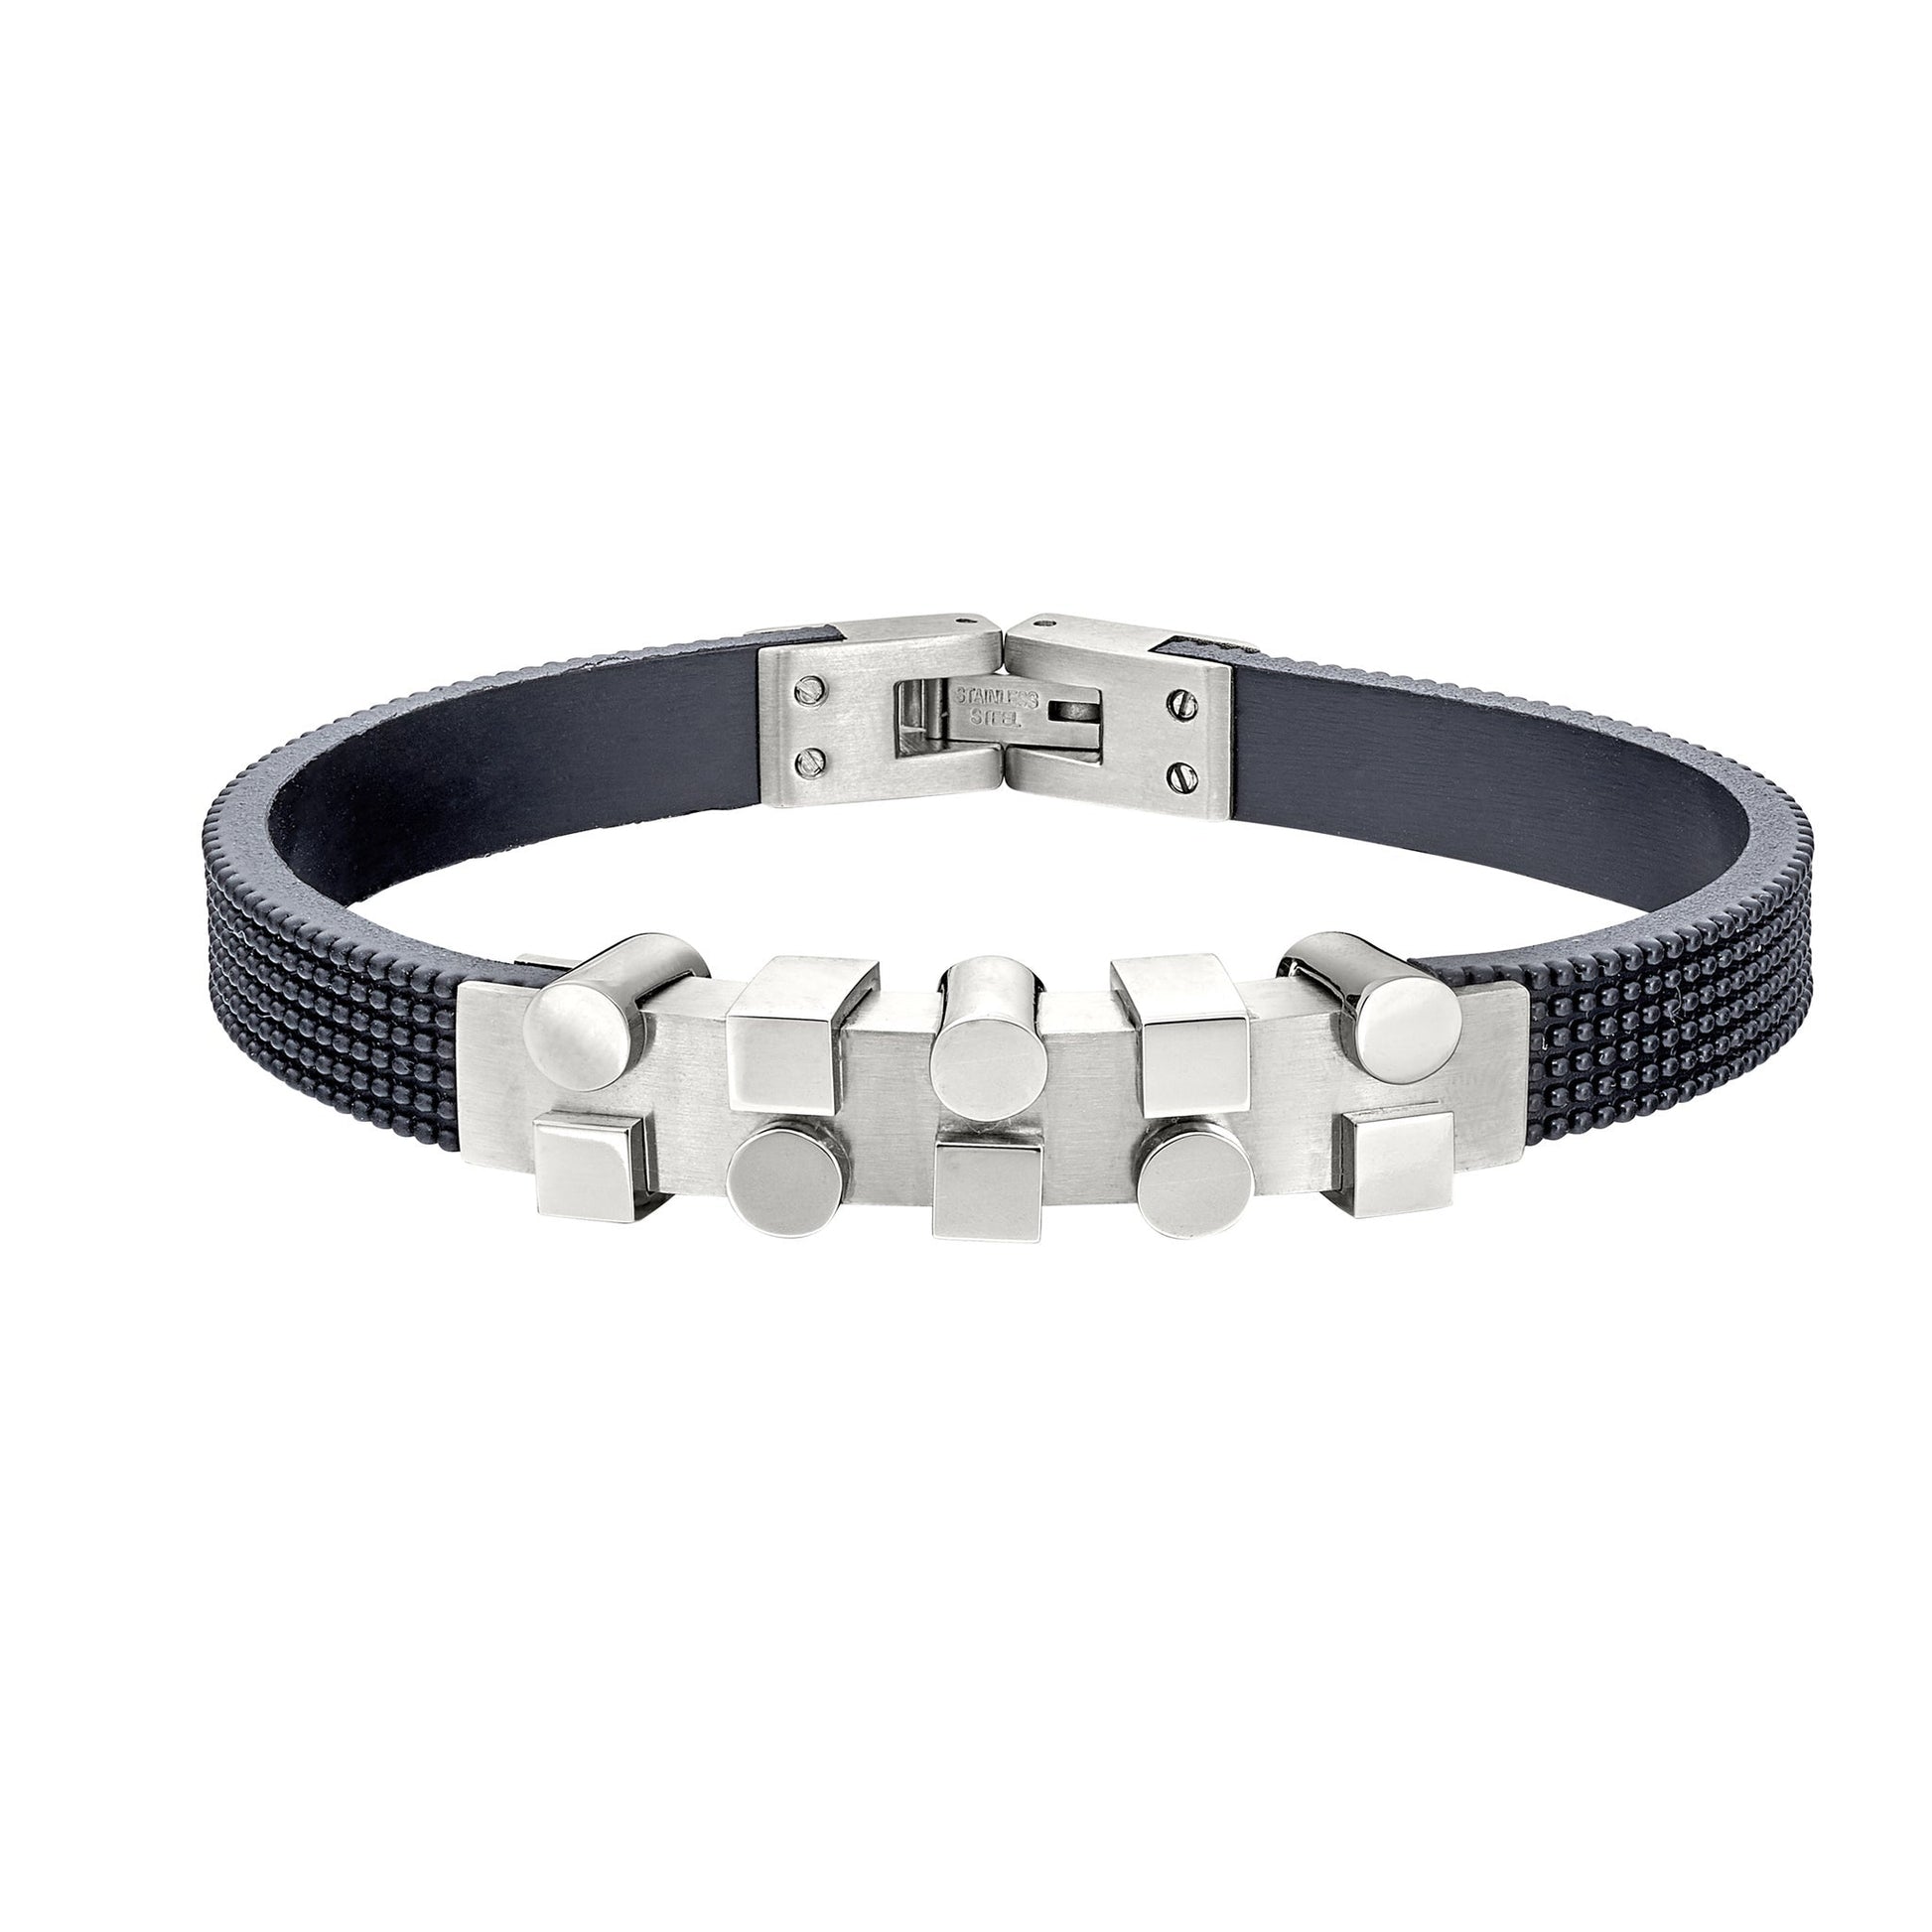 A stainless steel geometric bracelet displayed on a neutral white background.